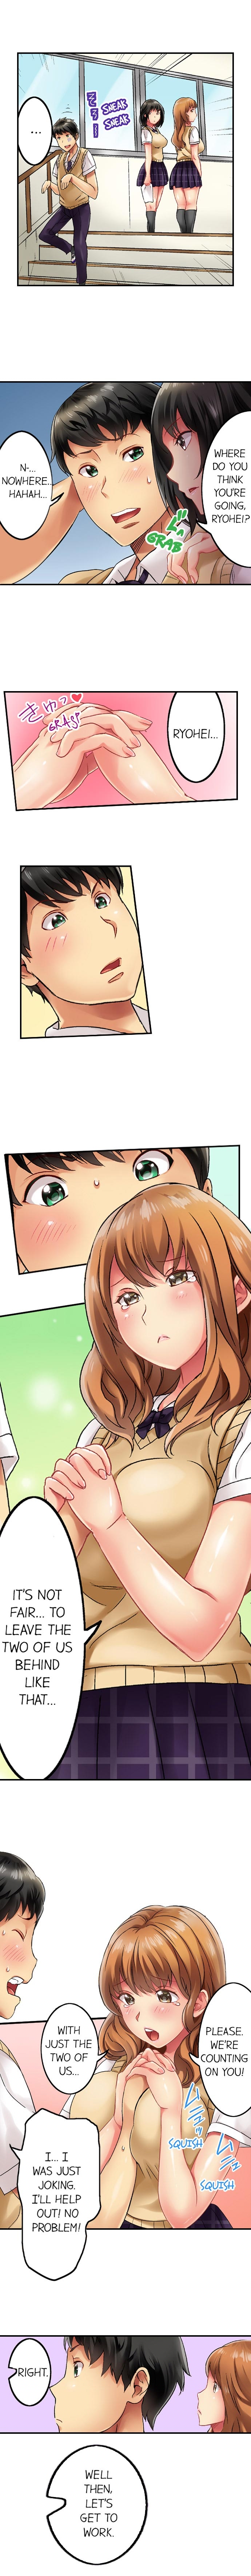 [Mituya] Seeing Her Panties Lets Me Stick In Ch.1 [ENG] 3